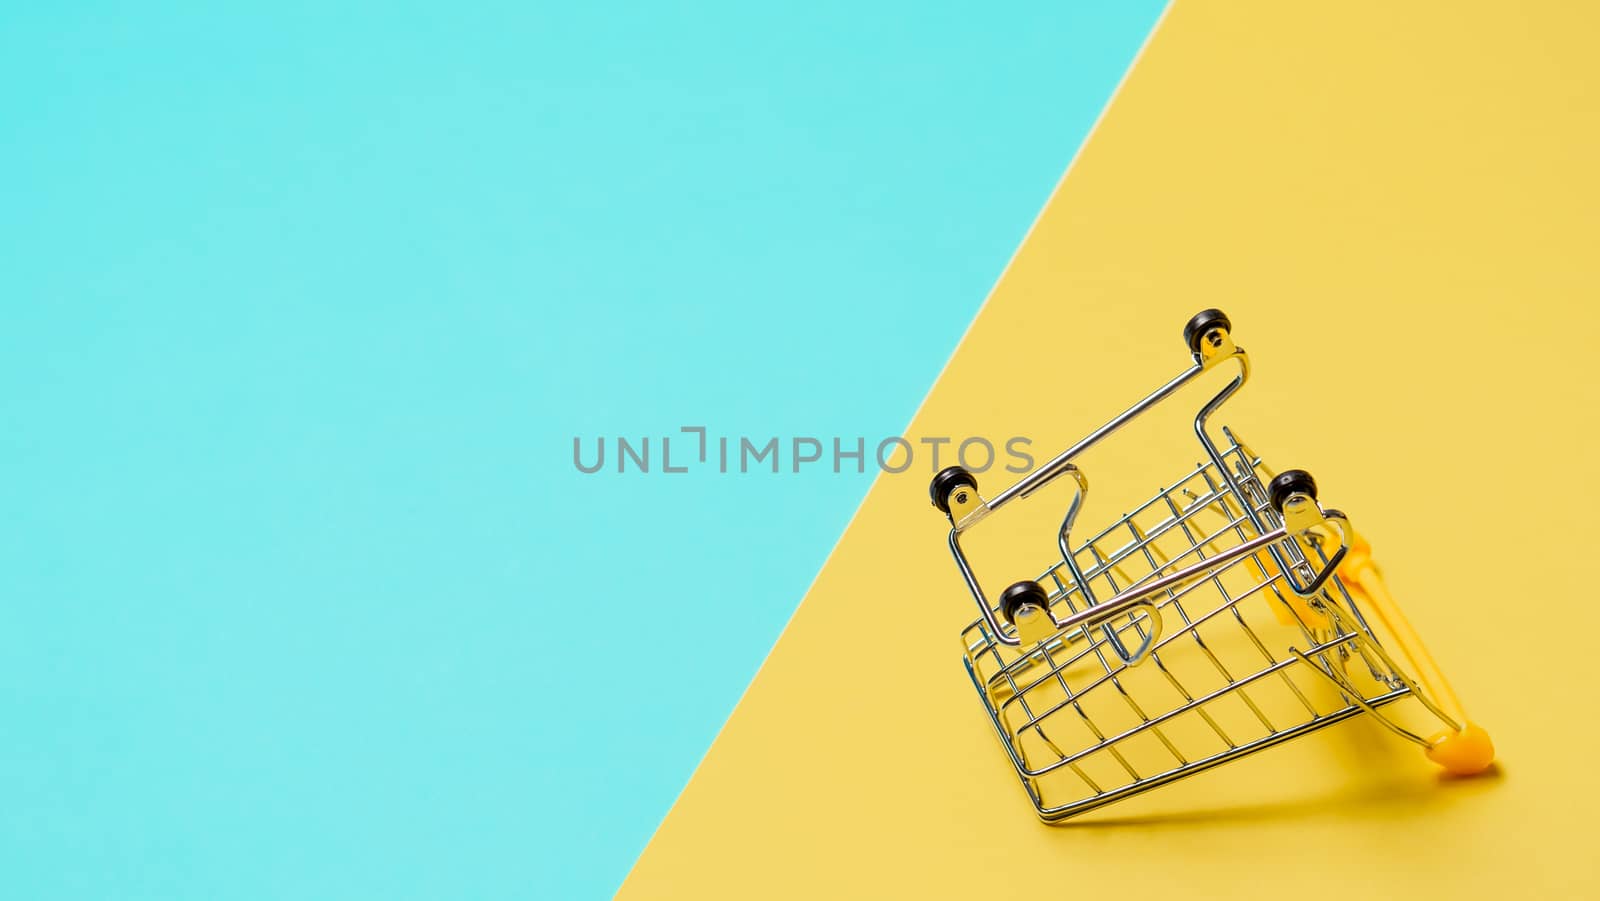 Empty inverted shopping cart on blue and yellow background. Inverted toy trolley on bright colorful background, copy space for text or design.